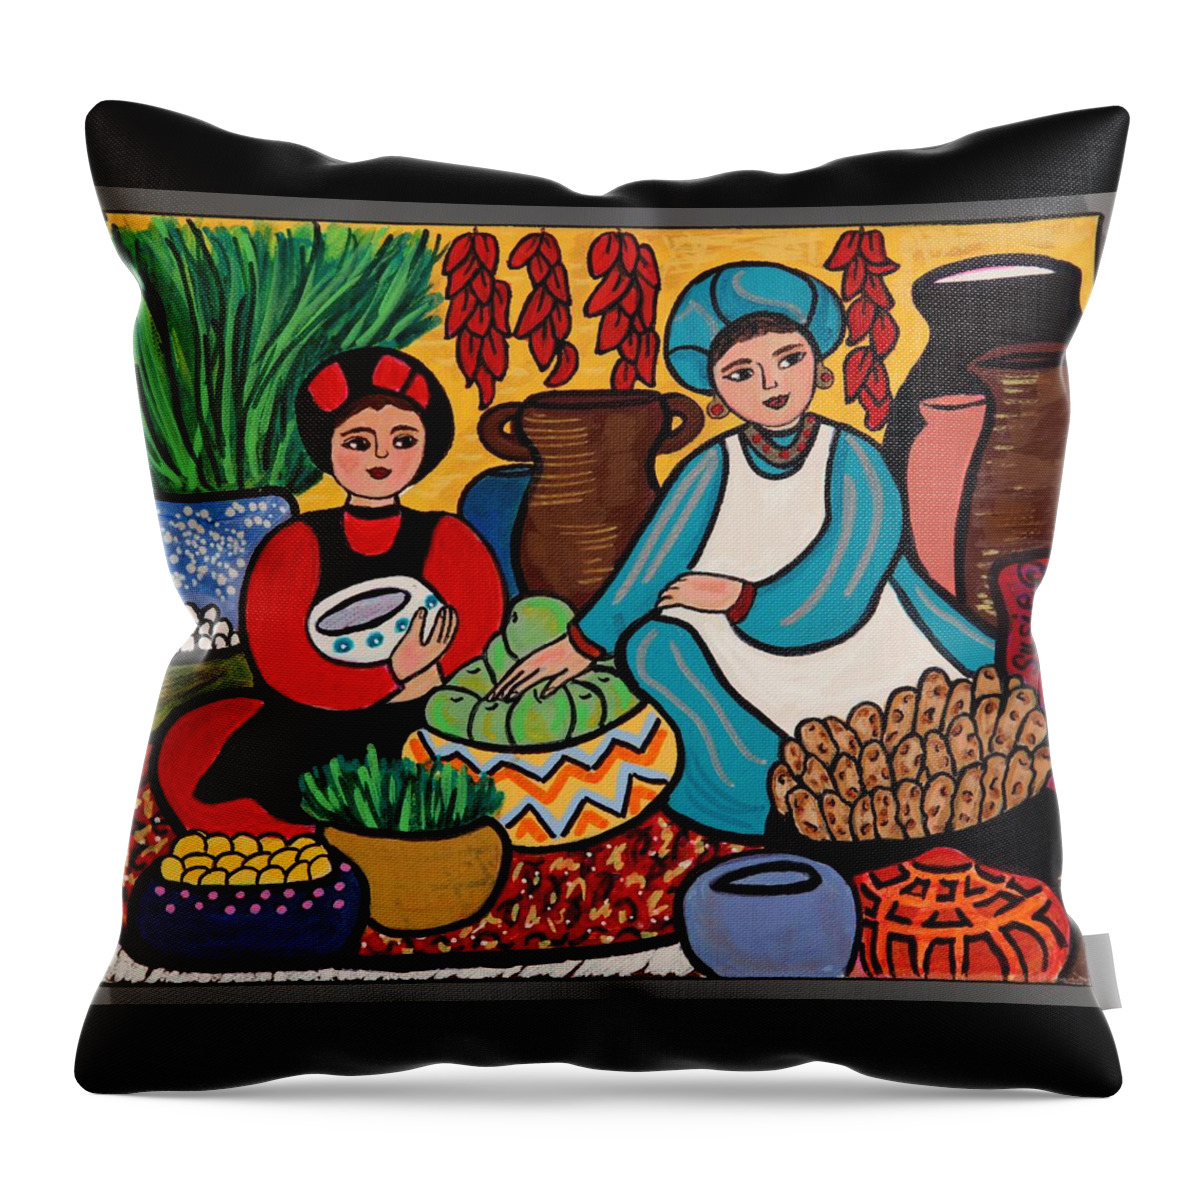 Potatoes Throw Pillow featuring the painting Another Day at the Market by Susie Grossman